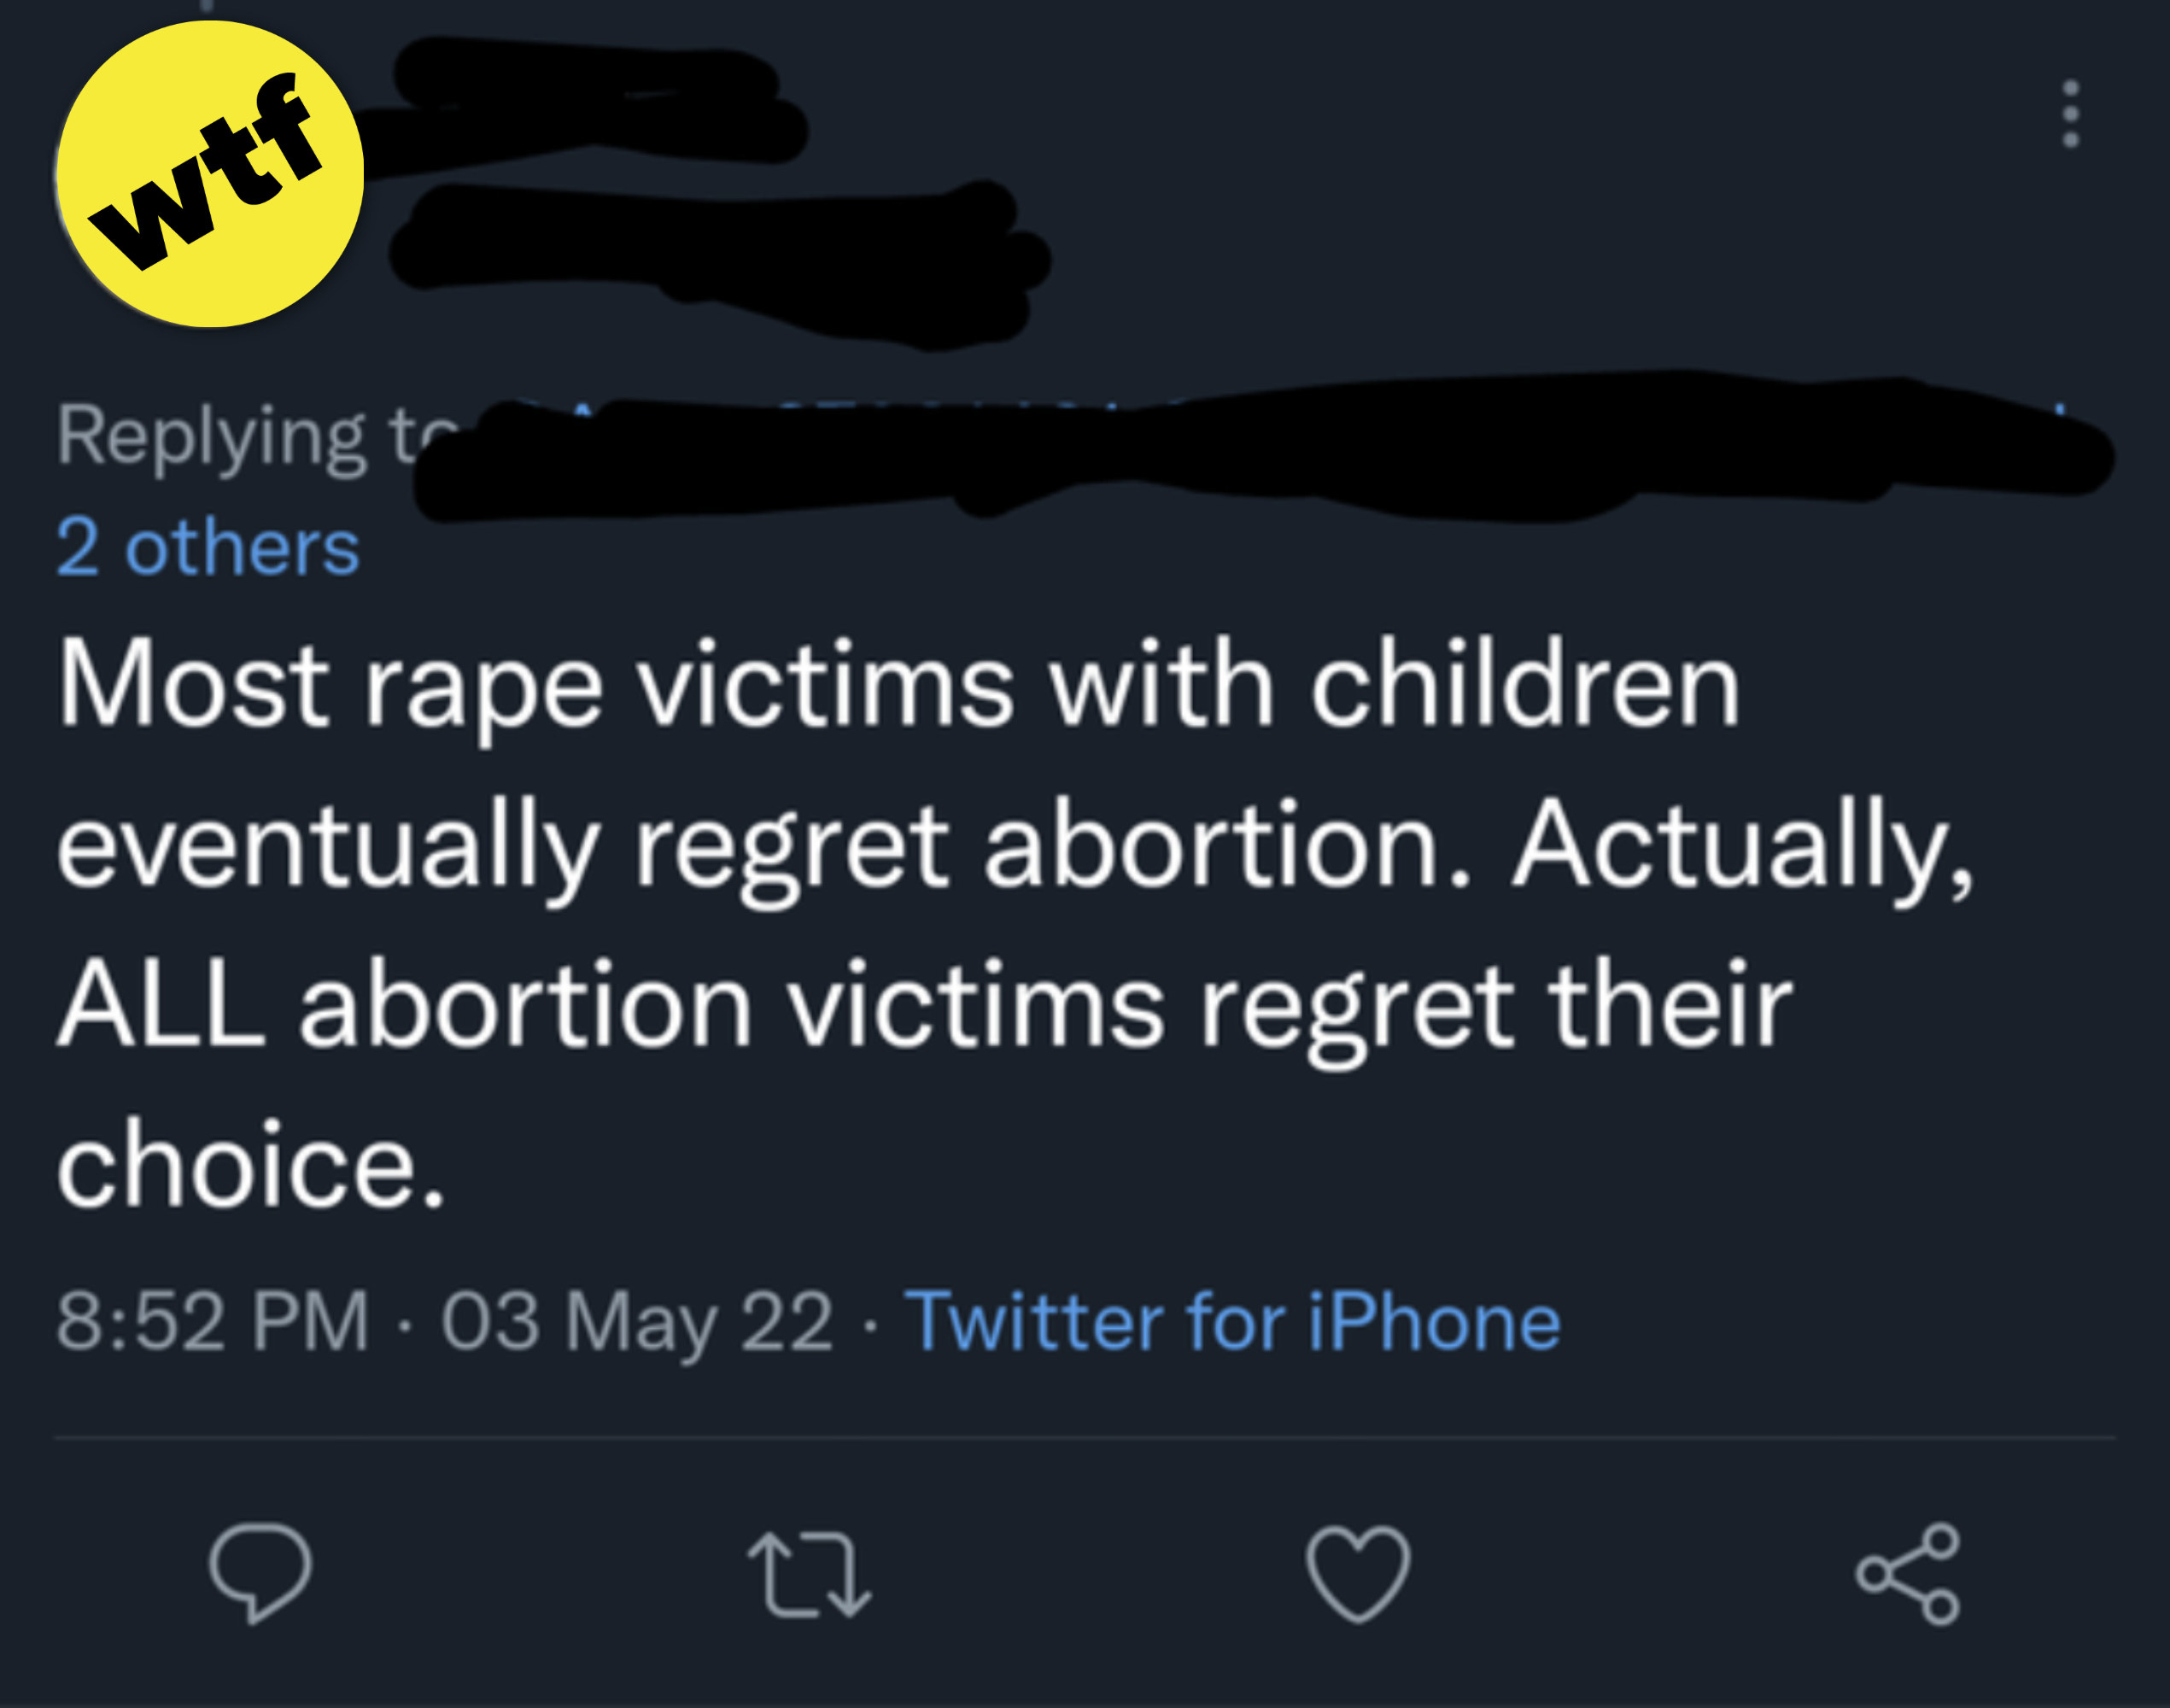 A person on Twitter claims &quot;Most rape victims with children eventually regret abortion&quot;